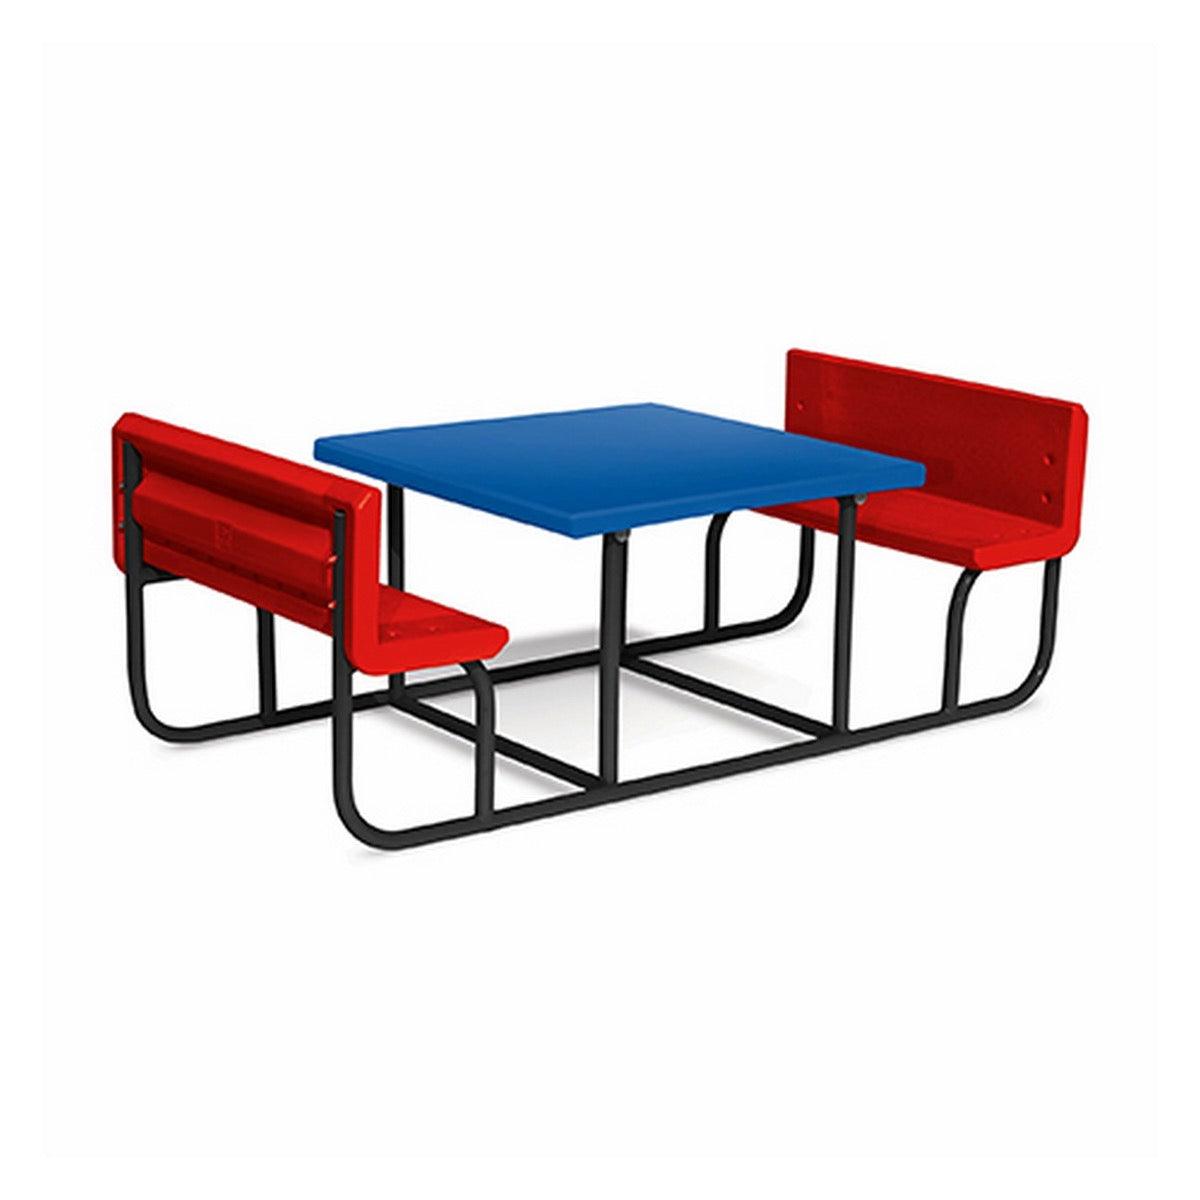 Ok Play Two Good, Table & Chair, Study Table, Perfect For Home And School, Blue & Red, 5 to 10 Years